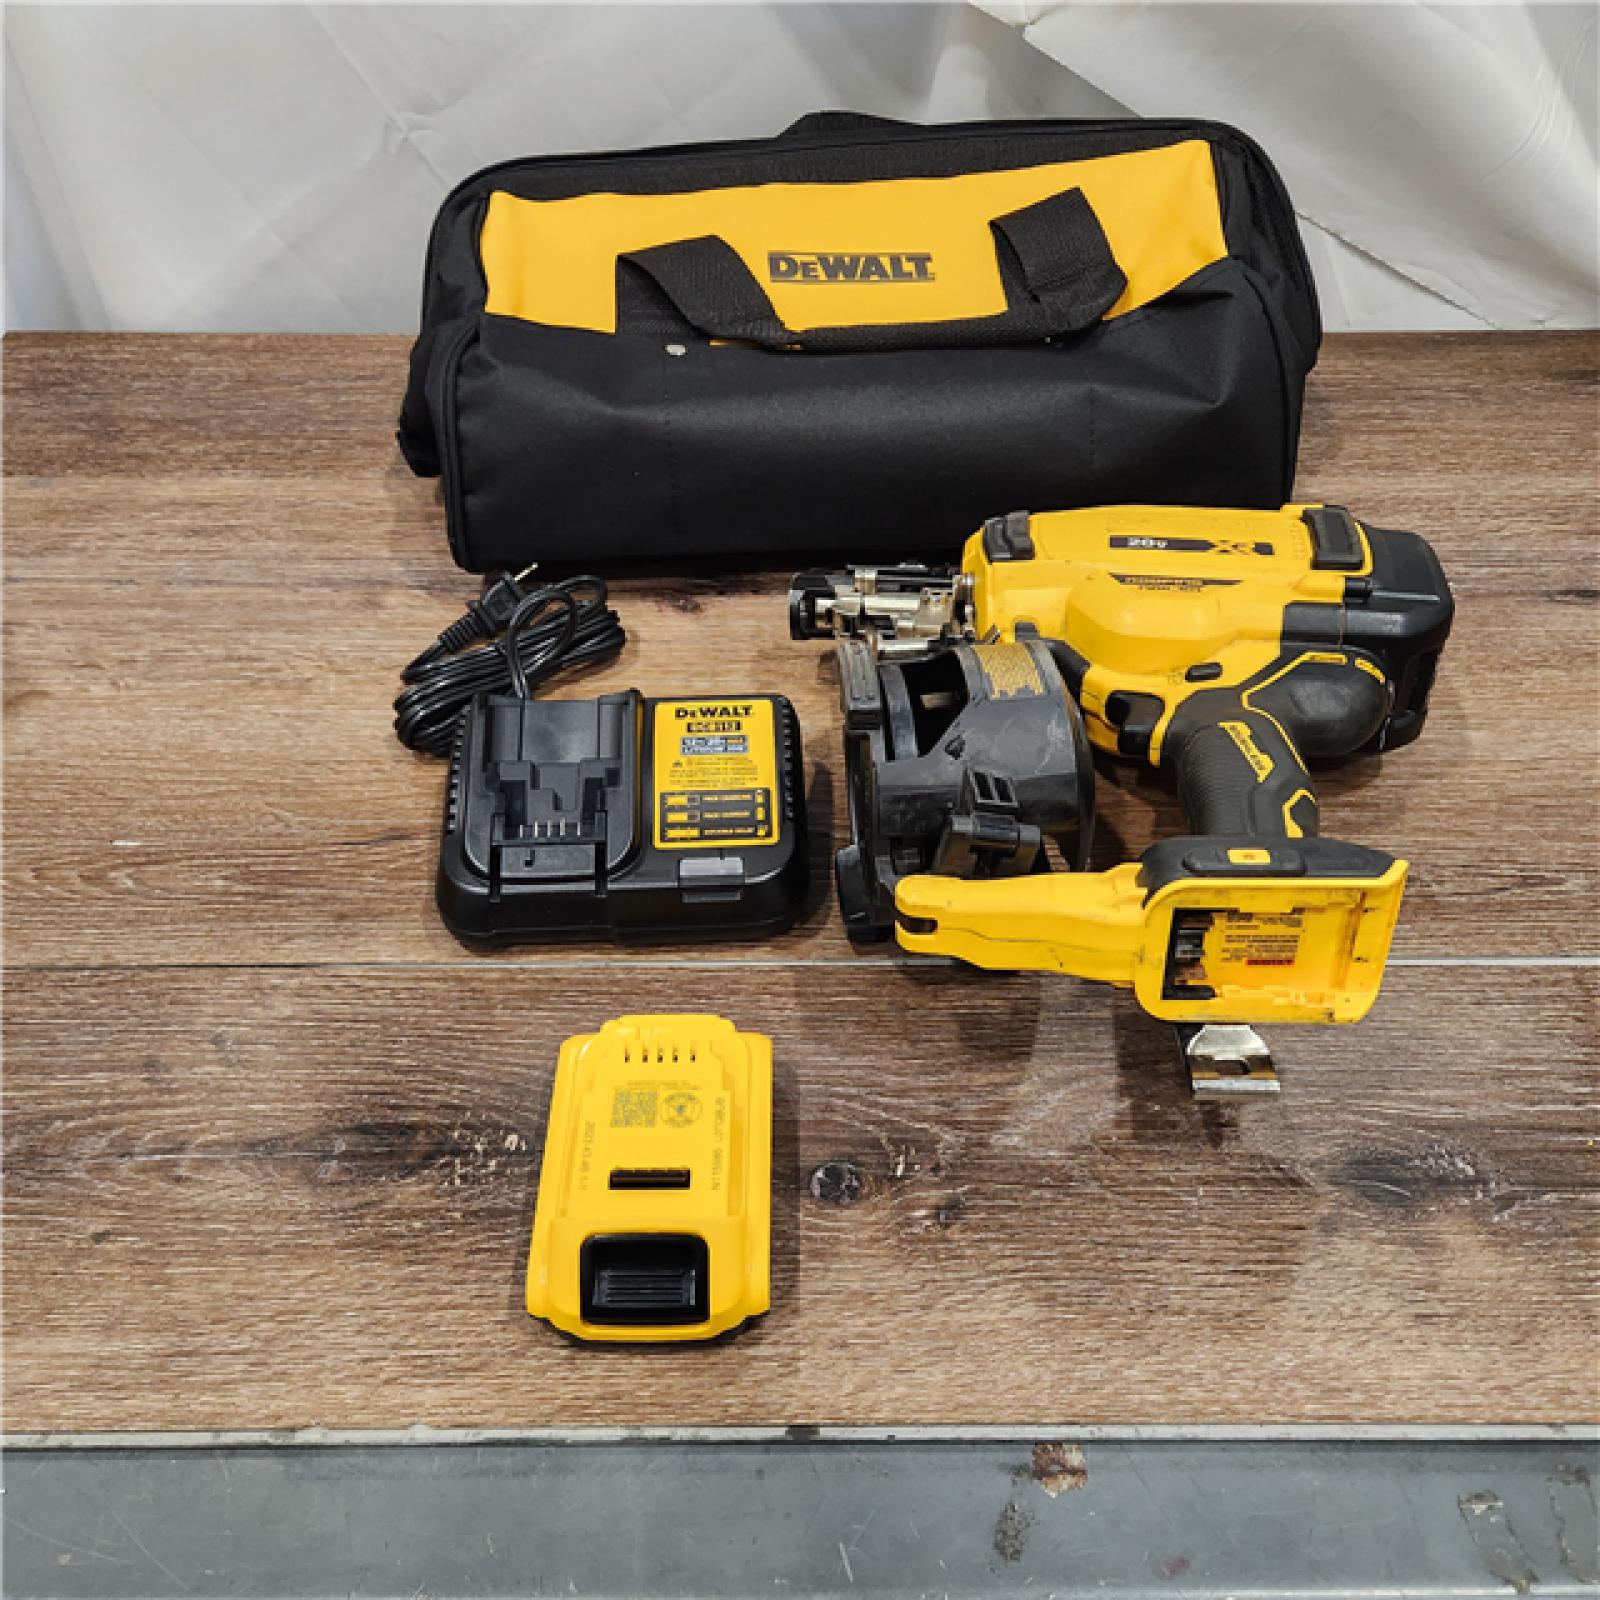 AS-IS Stanley  Black & Decker 2007898 Roofing Nailer Cordless Kit  (not included charge & battery)